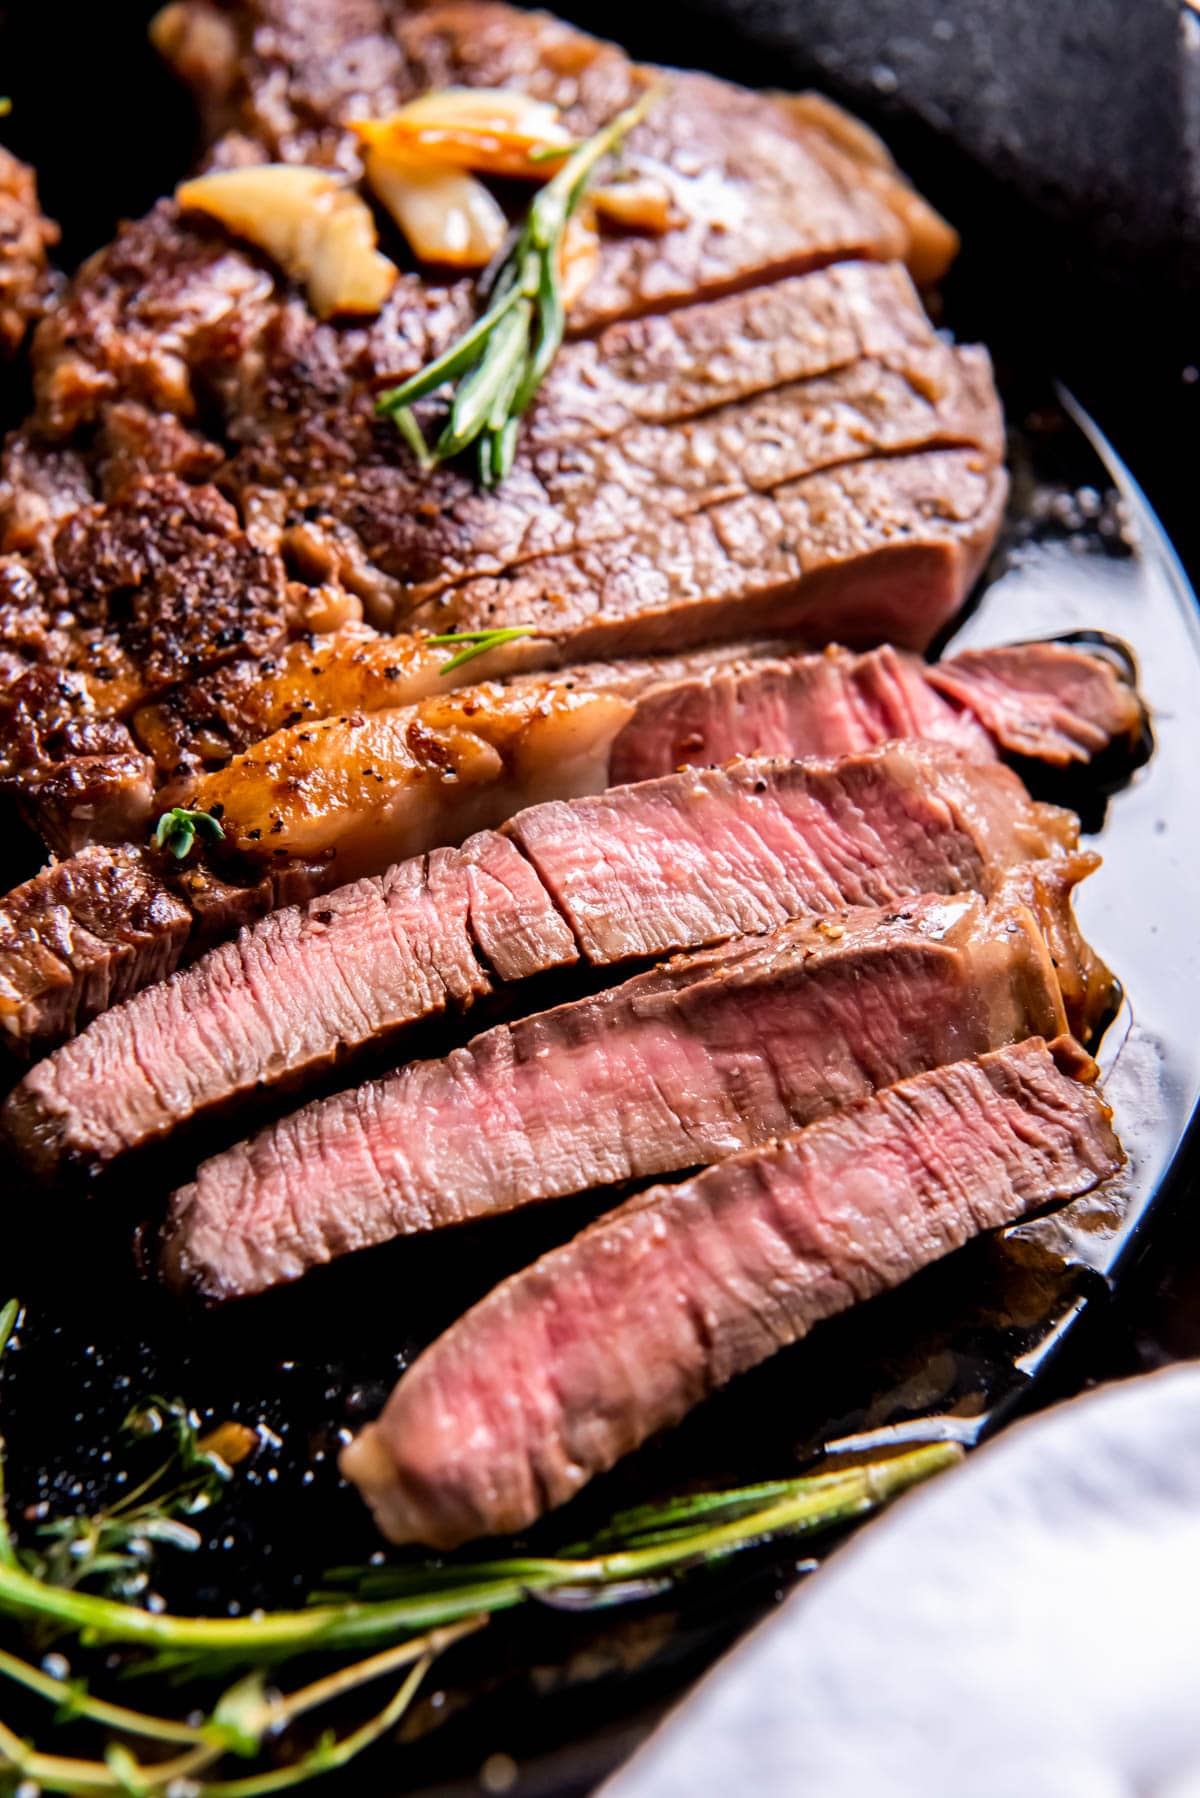 A cooked ribeye steak sliced in a cast iron pan for serving.